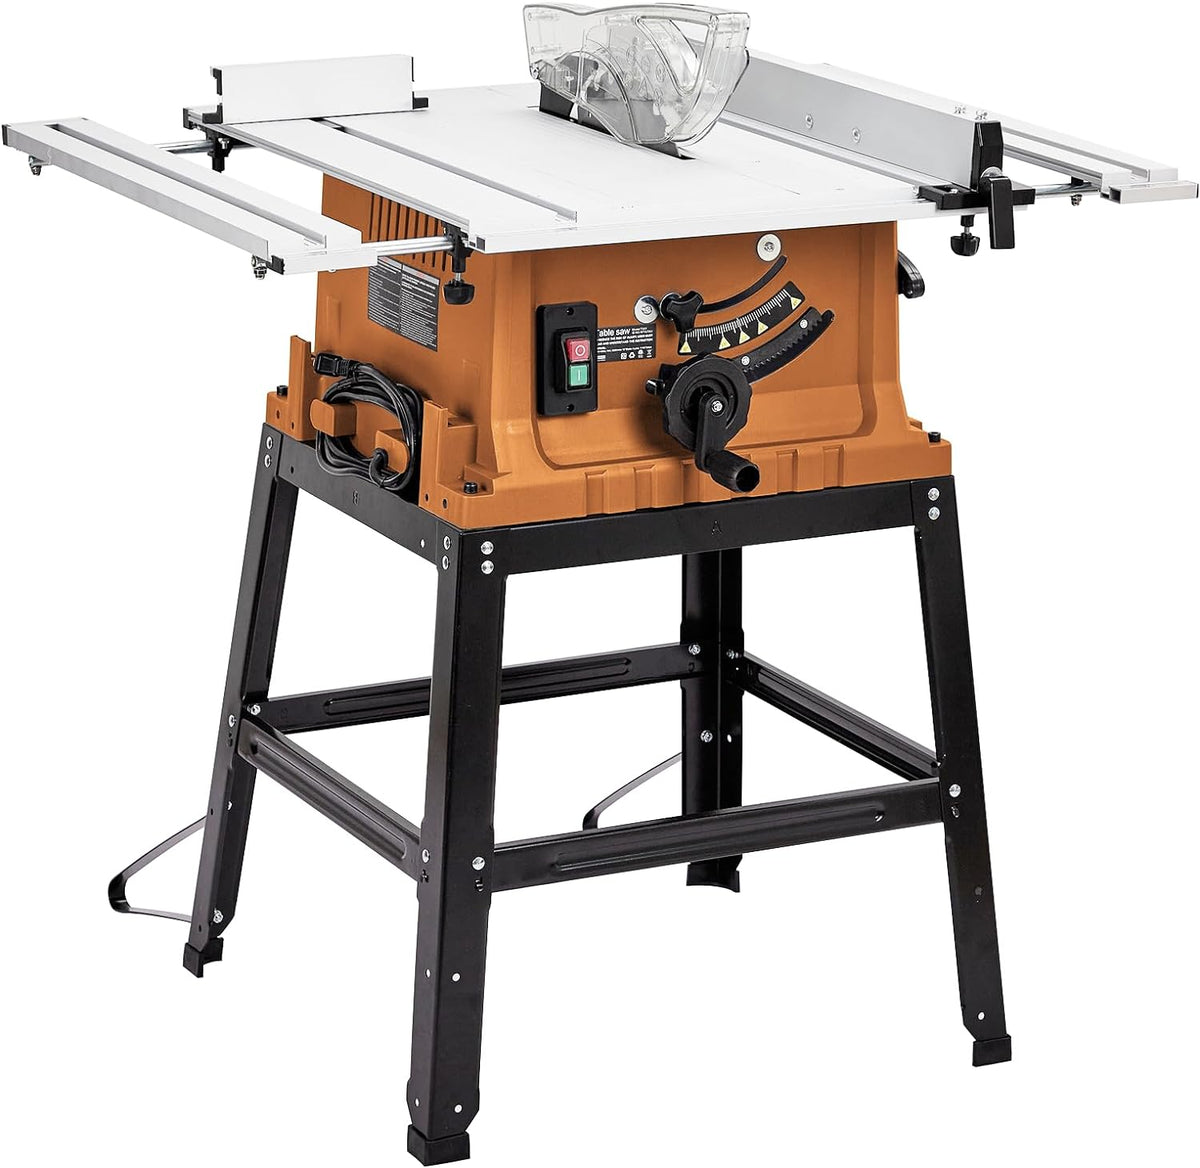 Table Saw, 10 Inch 15A Multifunctional Saw with Stand & Push Stick, 90° Cross Cut & 0-45° Bevel Cut, 5000RPM, Adjustable Blade Height for Woodworking, Orange